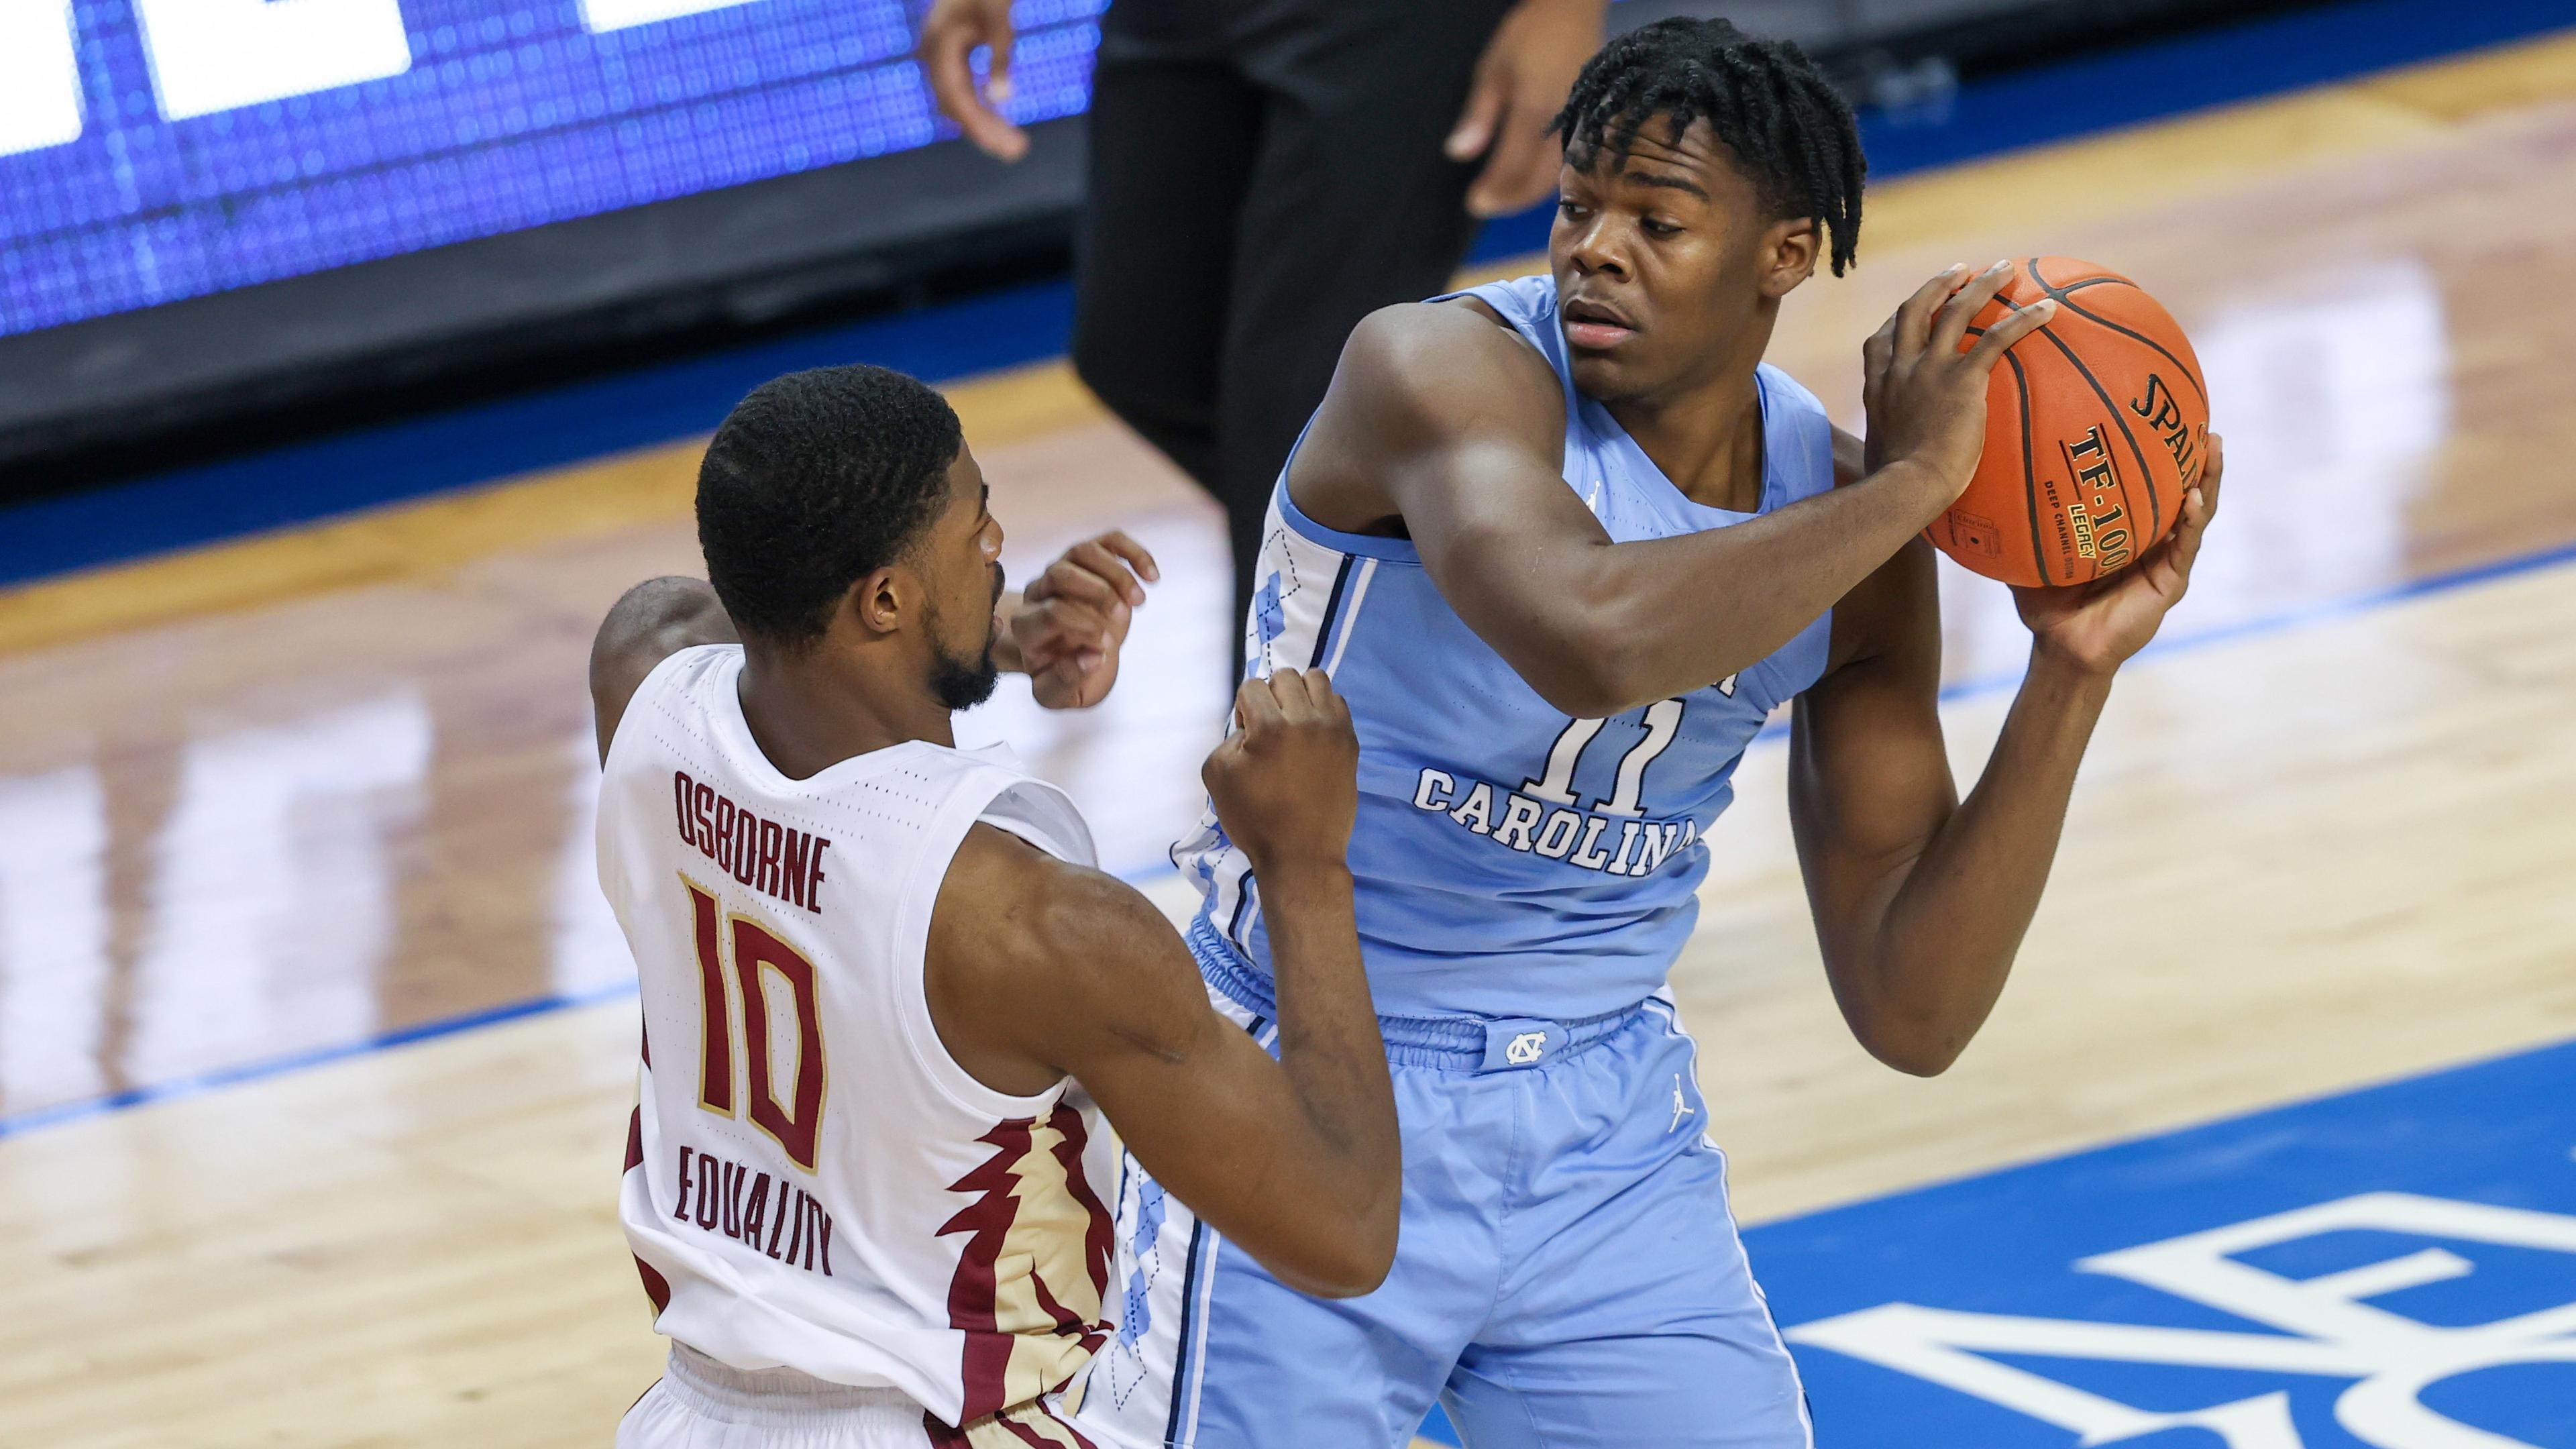 North Carolina Tar Heels forward Day'Ron Sharpe (11) looks to pass against Florida State Seminoles forward Malik Osborne (10) in the first half in the 2021 ACC tournament / Nell Redmond - USA TODAY Sports